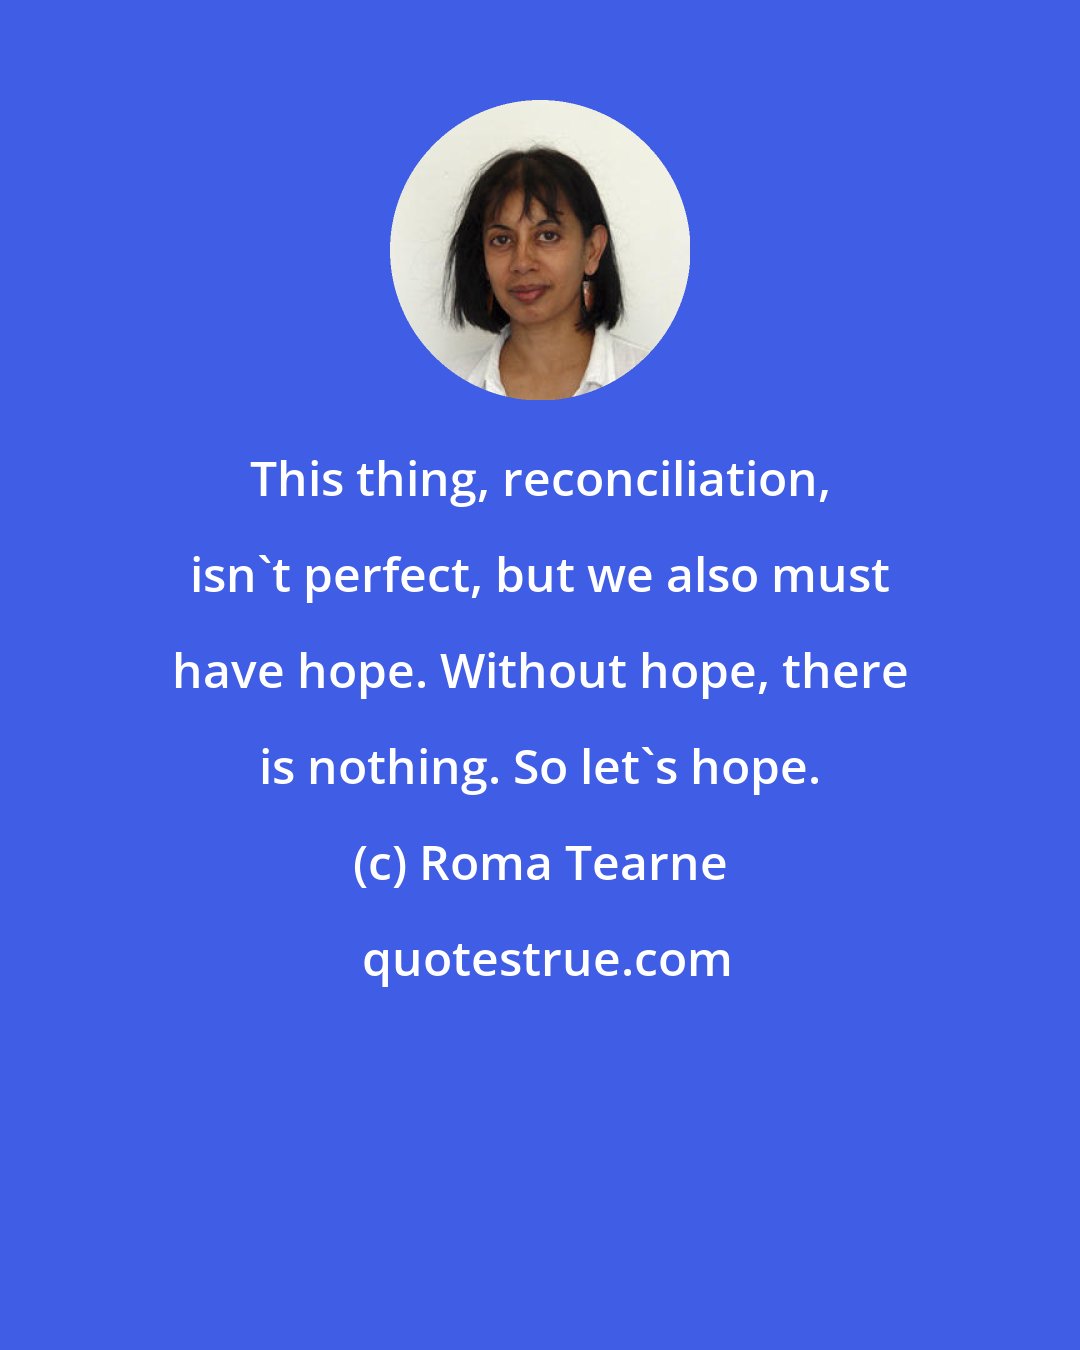 Roma Tearne: This thing, reconciliation, isn't perfect, but we also must have hope. Without hope, there is nothing. So let's hope.